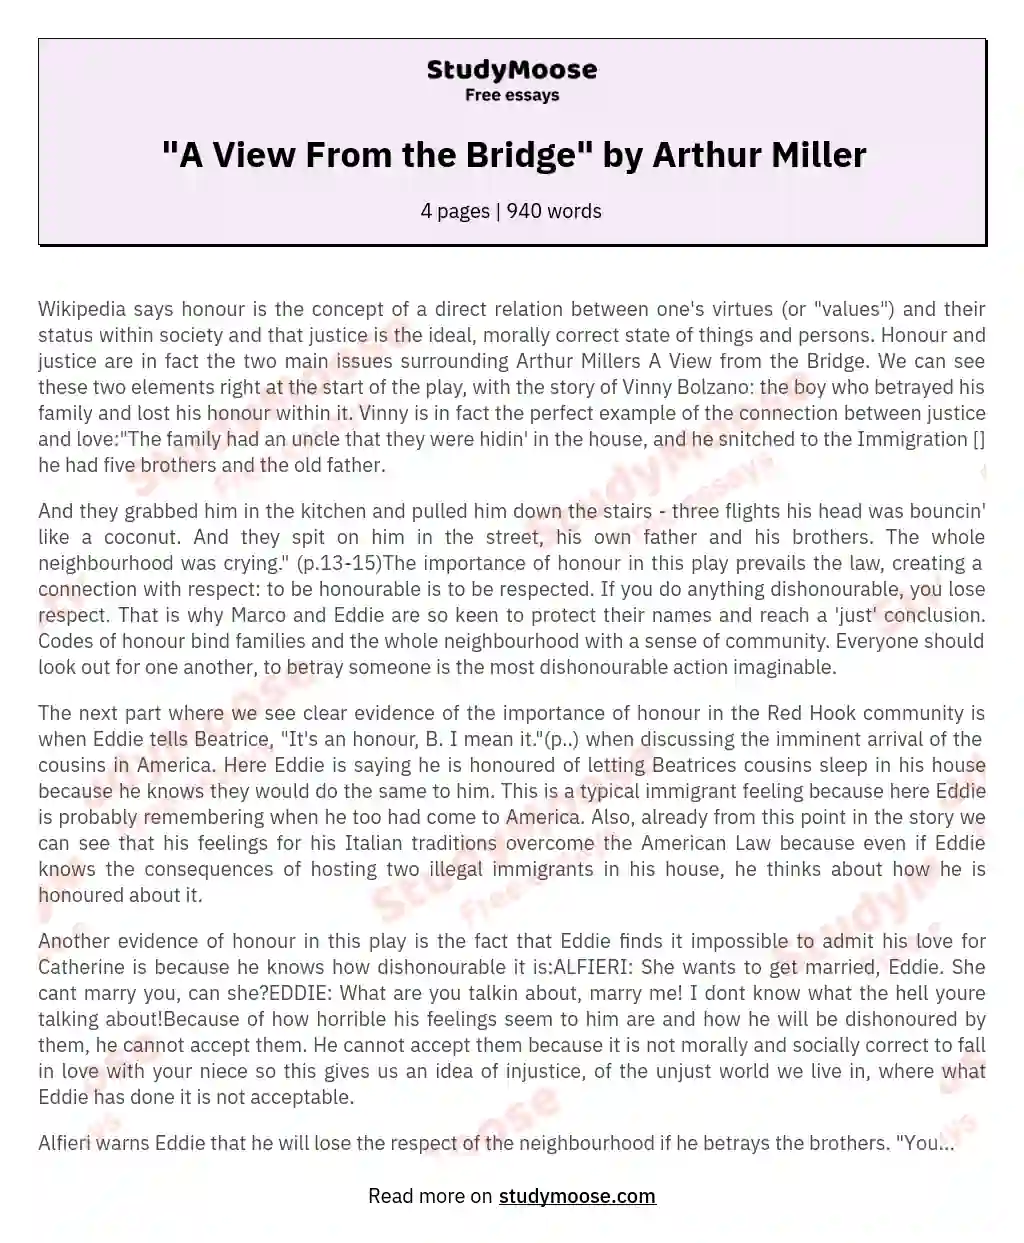 "A View From the Bridge" by Arthur Miller